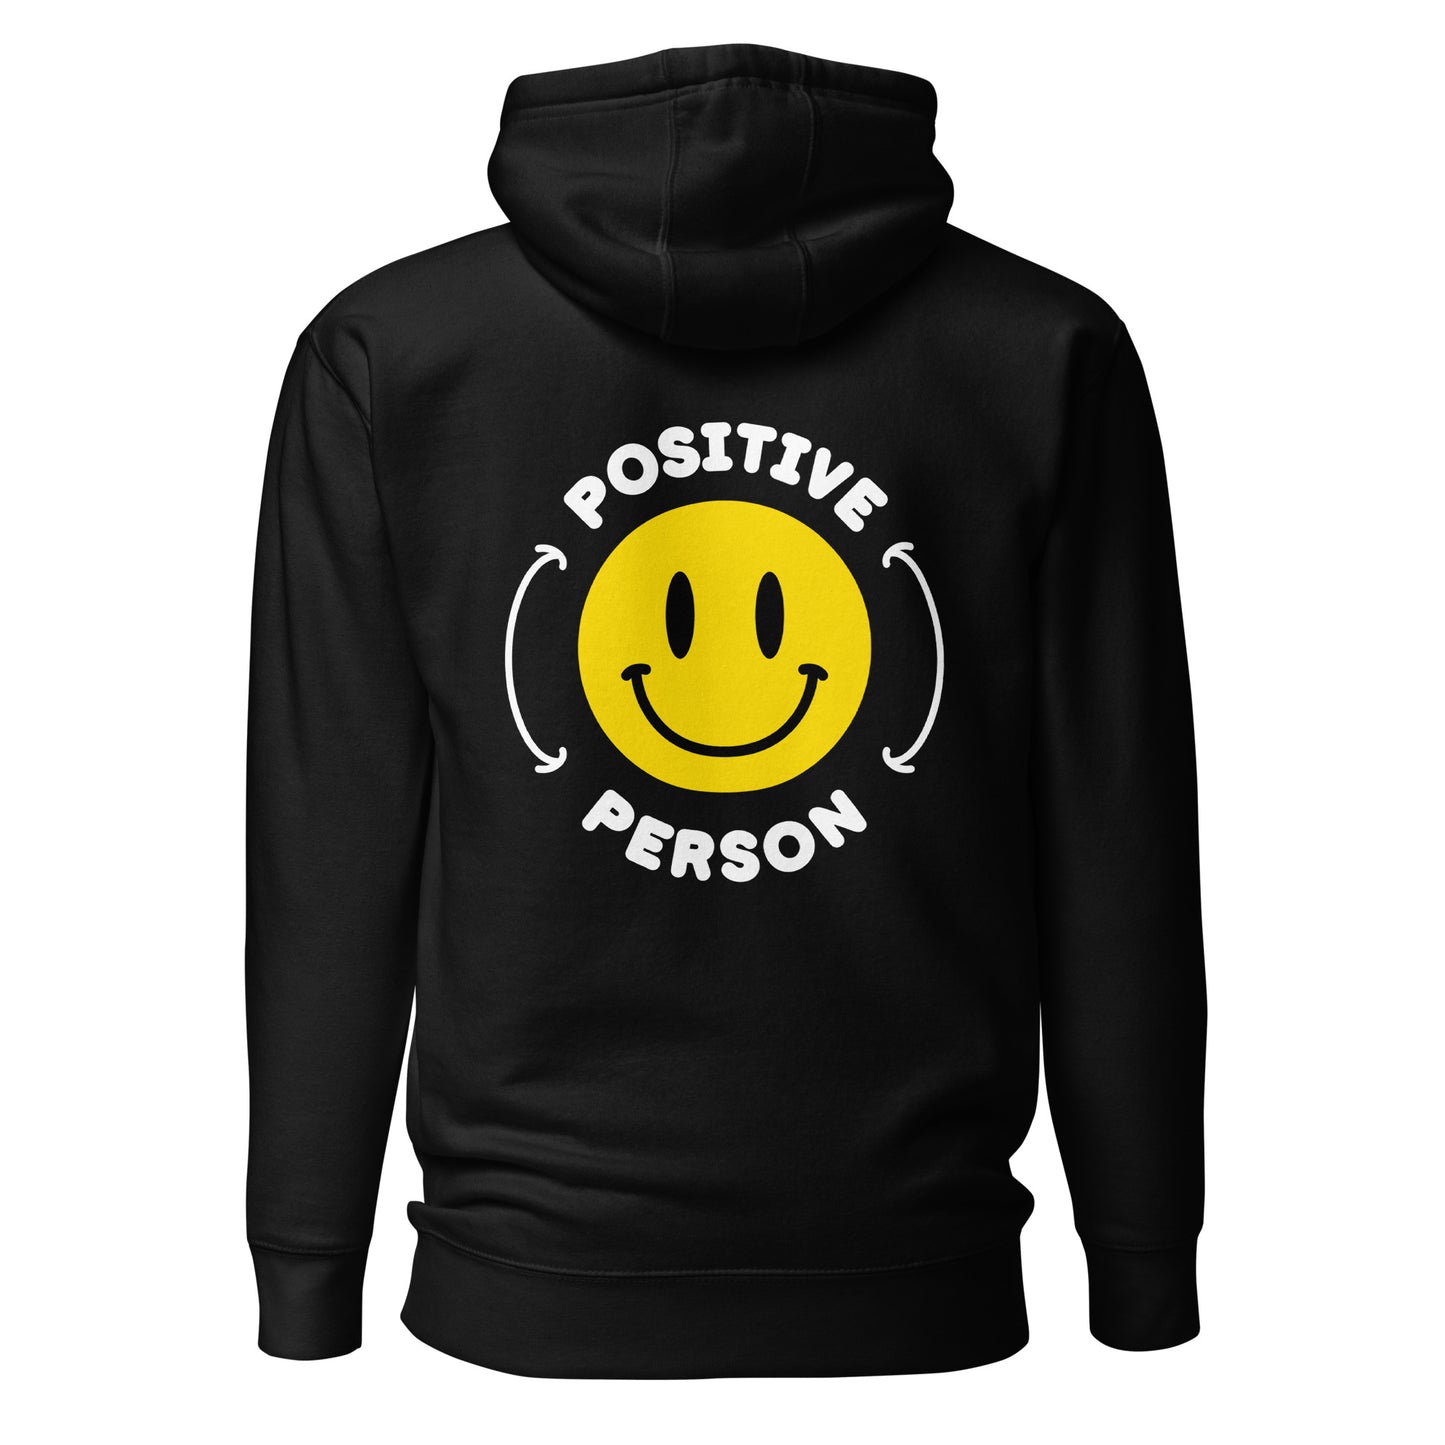 "Positive Person" Hoodie